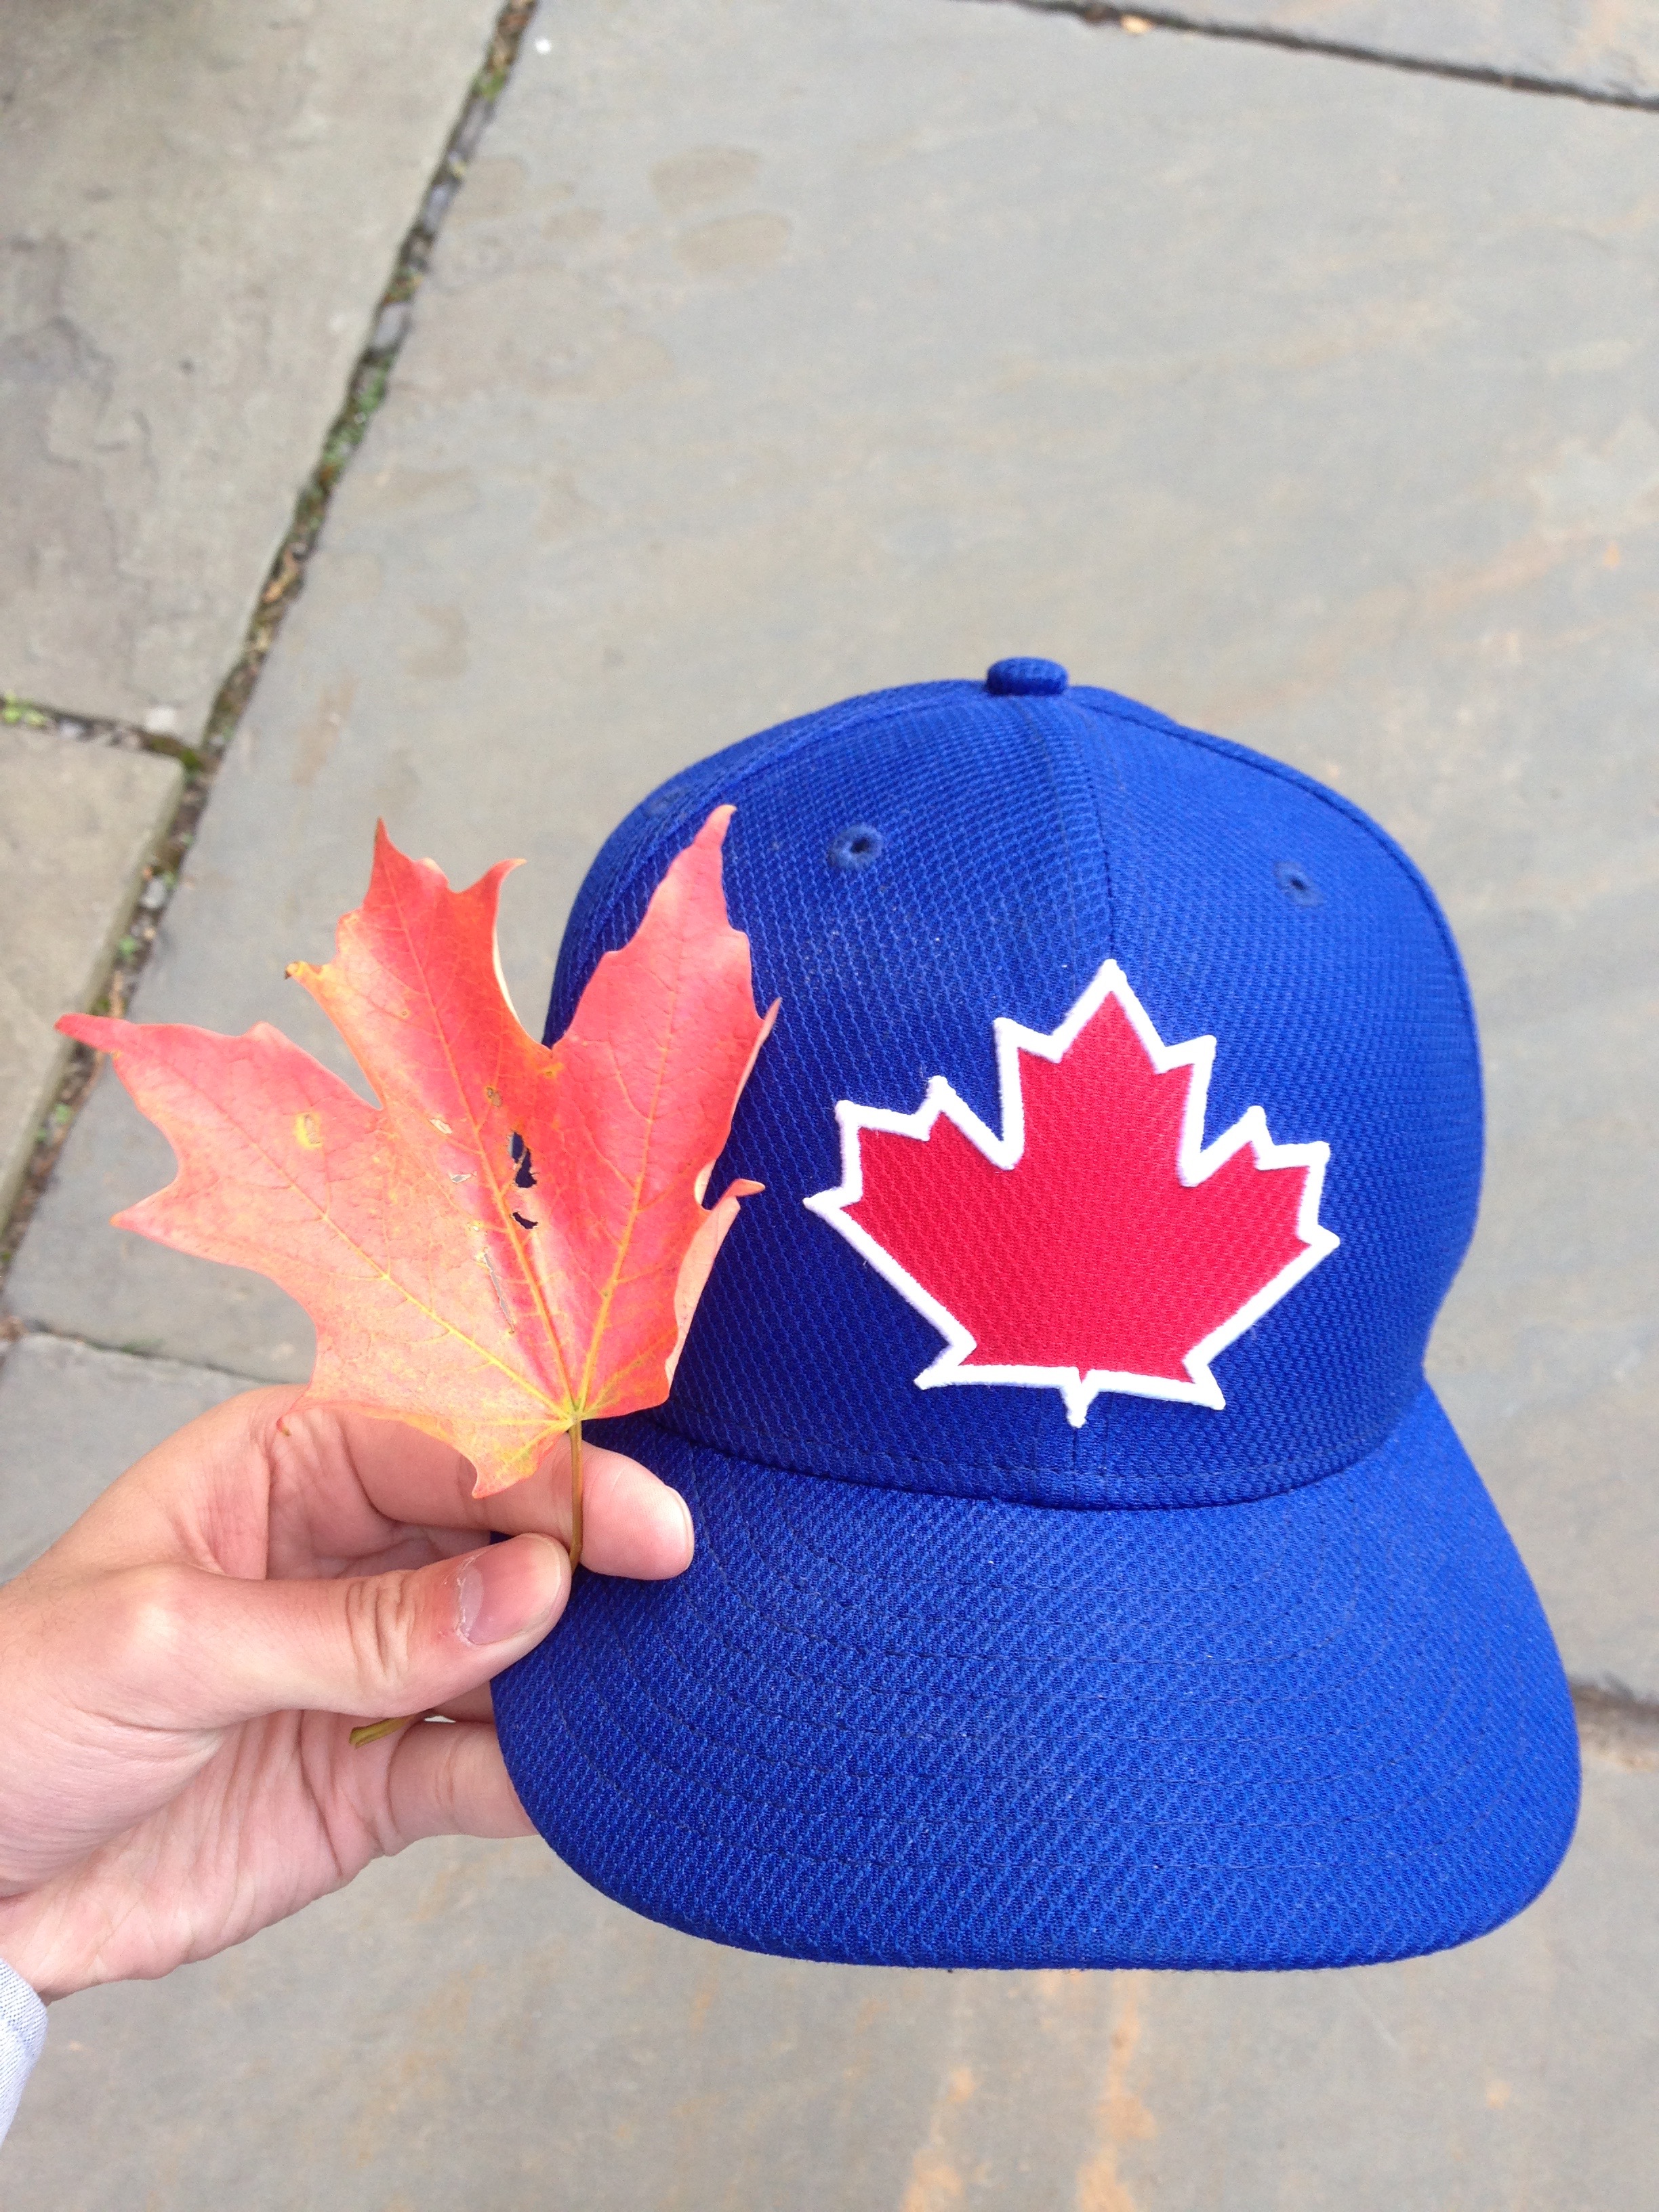 A photo of a blue hat with a maple leaf, next to a real maple leaf